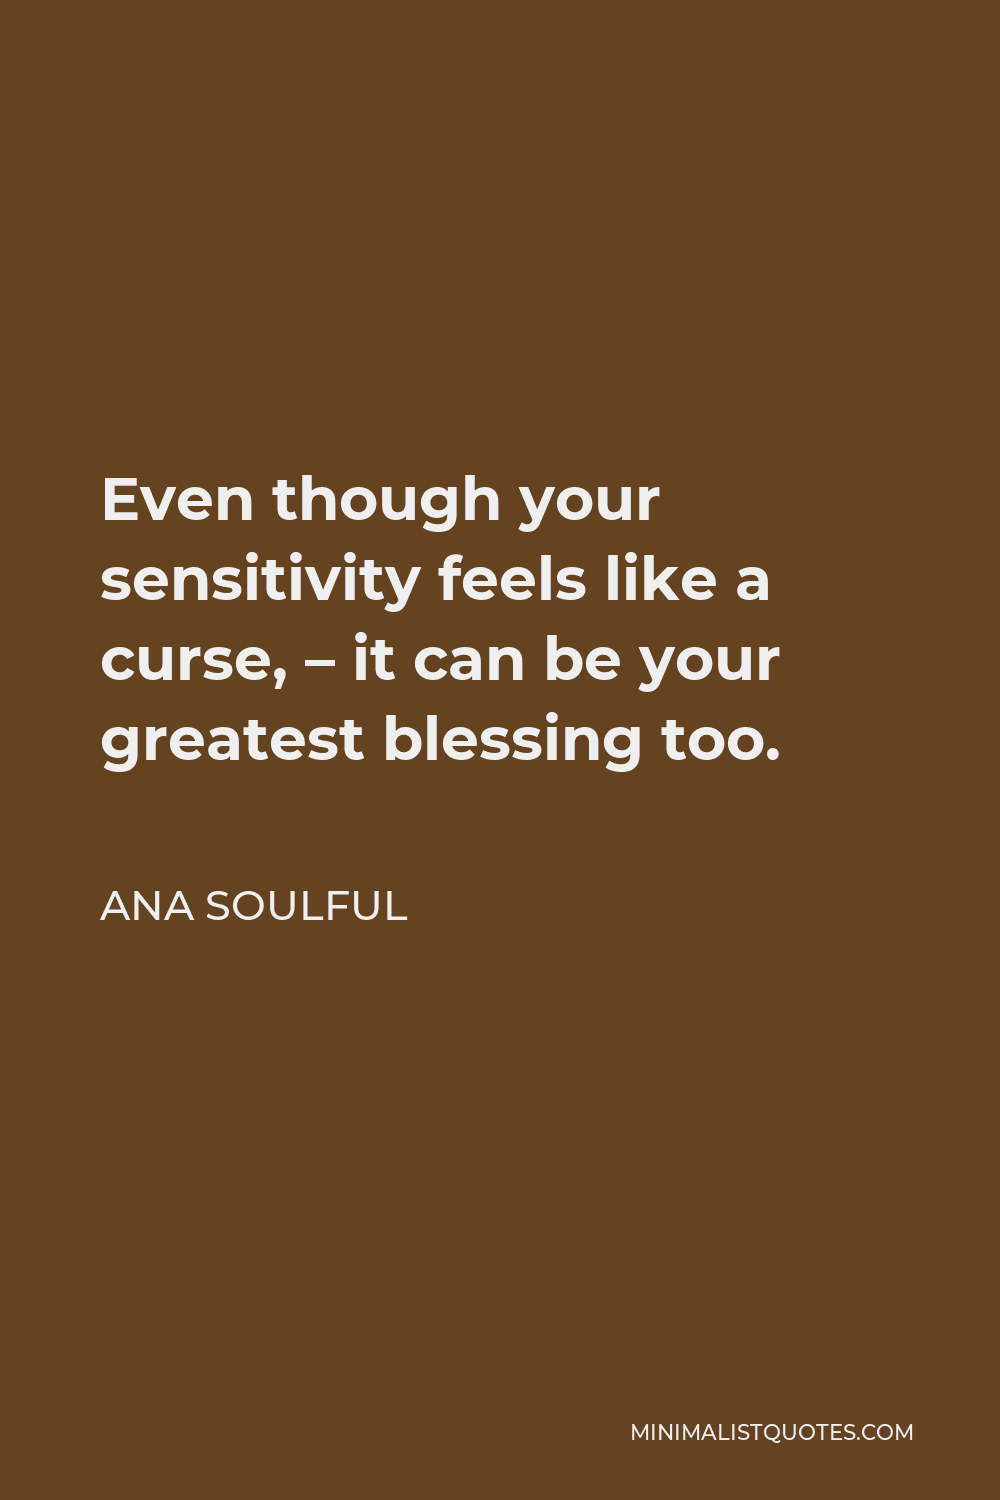 Ana Soulful Quote - Even though your sensitivity feels like a curse, – it can be your greatest blessing too.